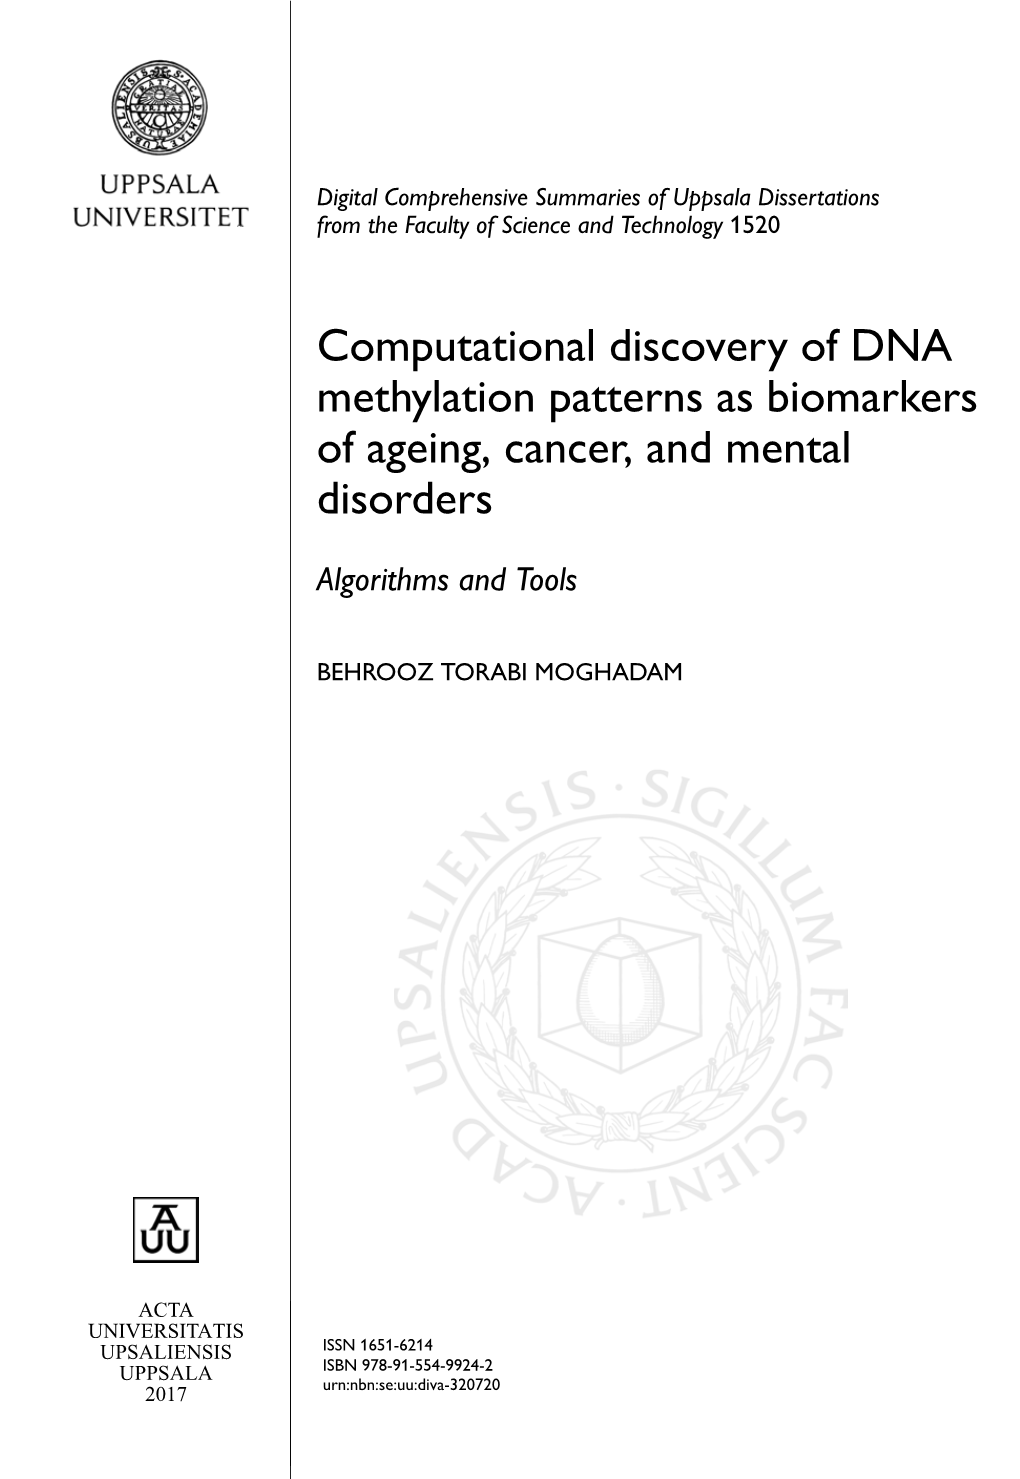 Computational Discovery of DNA Methylation Patterns As Biomarkers of Ageing, Cancer, and Mental Disorders